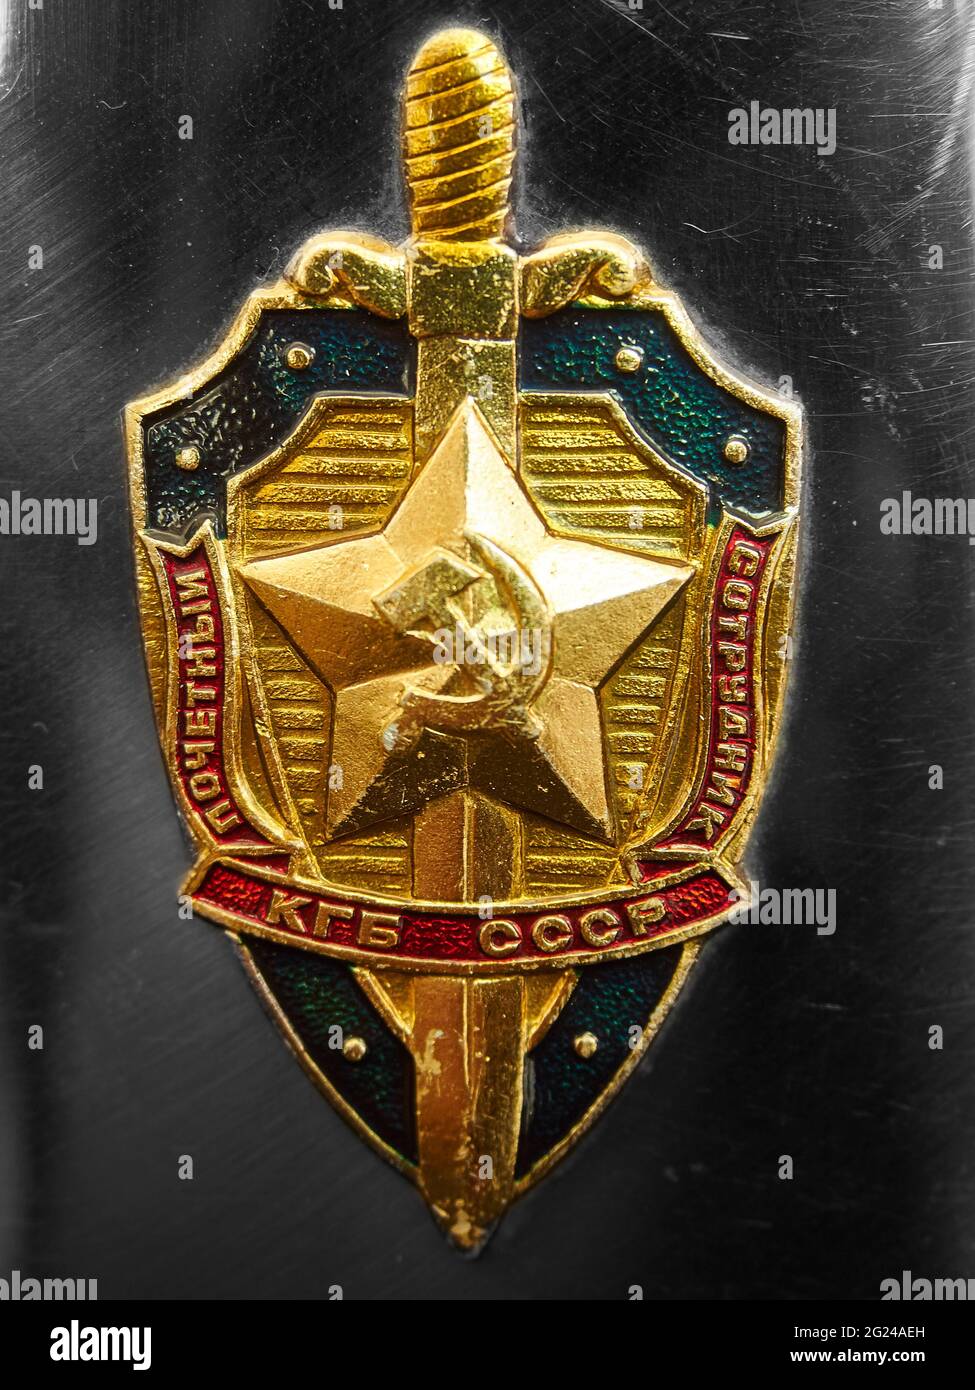 Pictorial, representative image of the badge / insignia of the KGB security agency, attached to a metal flask (photographer’s own) - metal background. Stock Photo